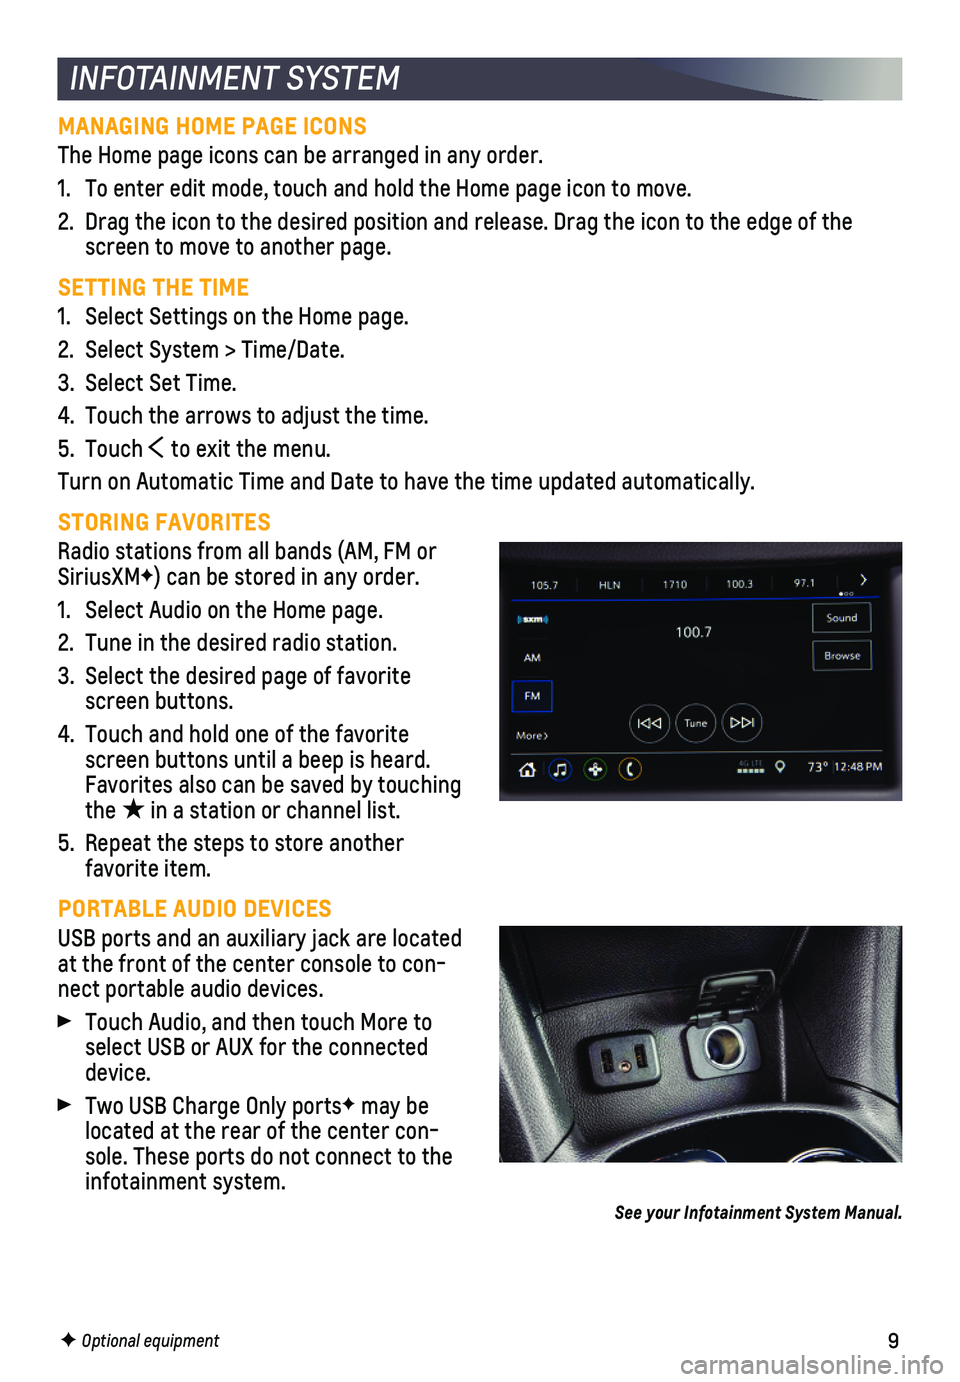 CHEVROLET CRUZE 2019  Owners Manual 9
INFOTAINMENT SYSTEM
MANAGING HOME PAGE ICONS 
The Home page icons can be arranged in any order. 
1. To enter edit mode, touch and hold the Home page icon to move. 
2. Drag the icon to the desired po